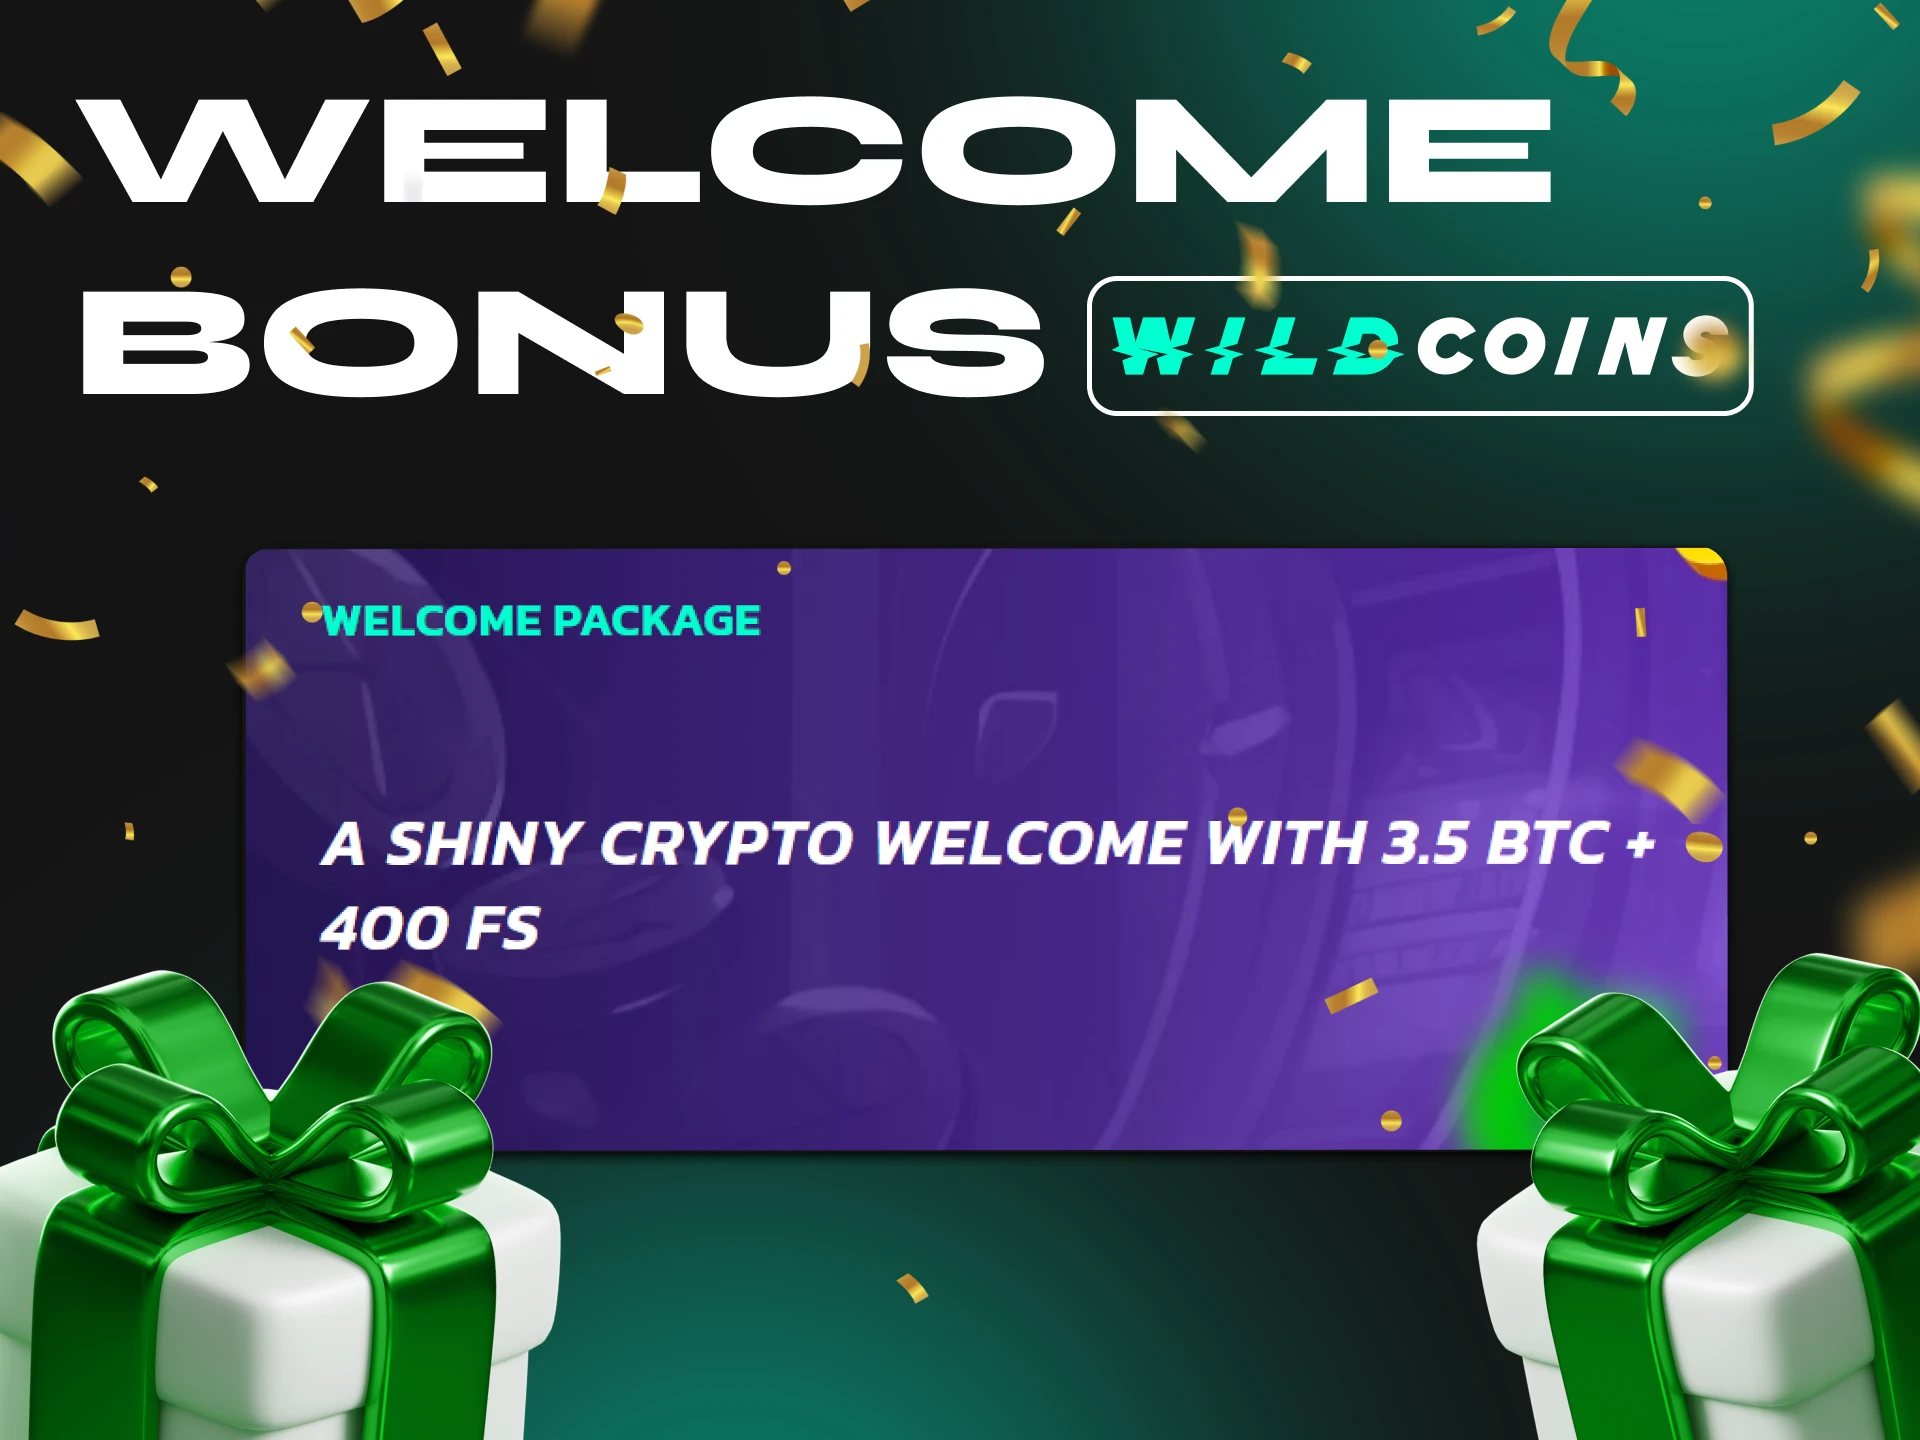 At Wildcoins Casino you can get a really good welcome bonus.